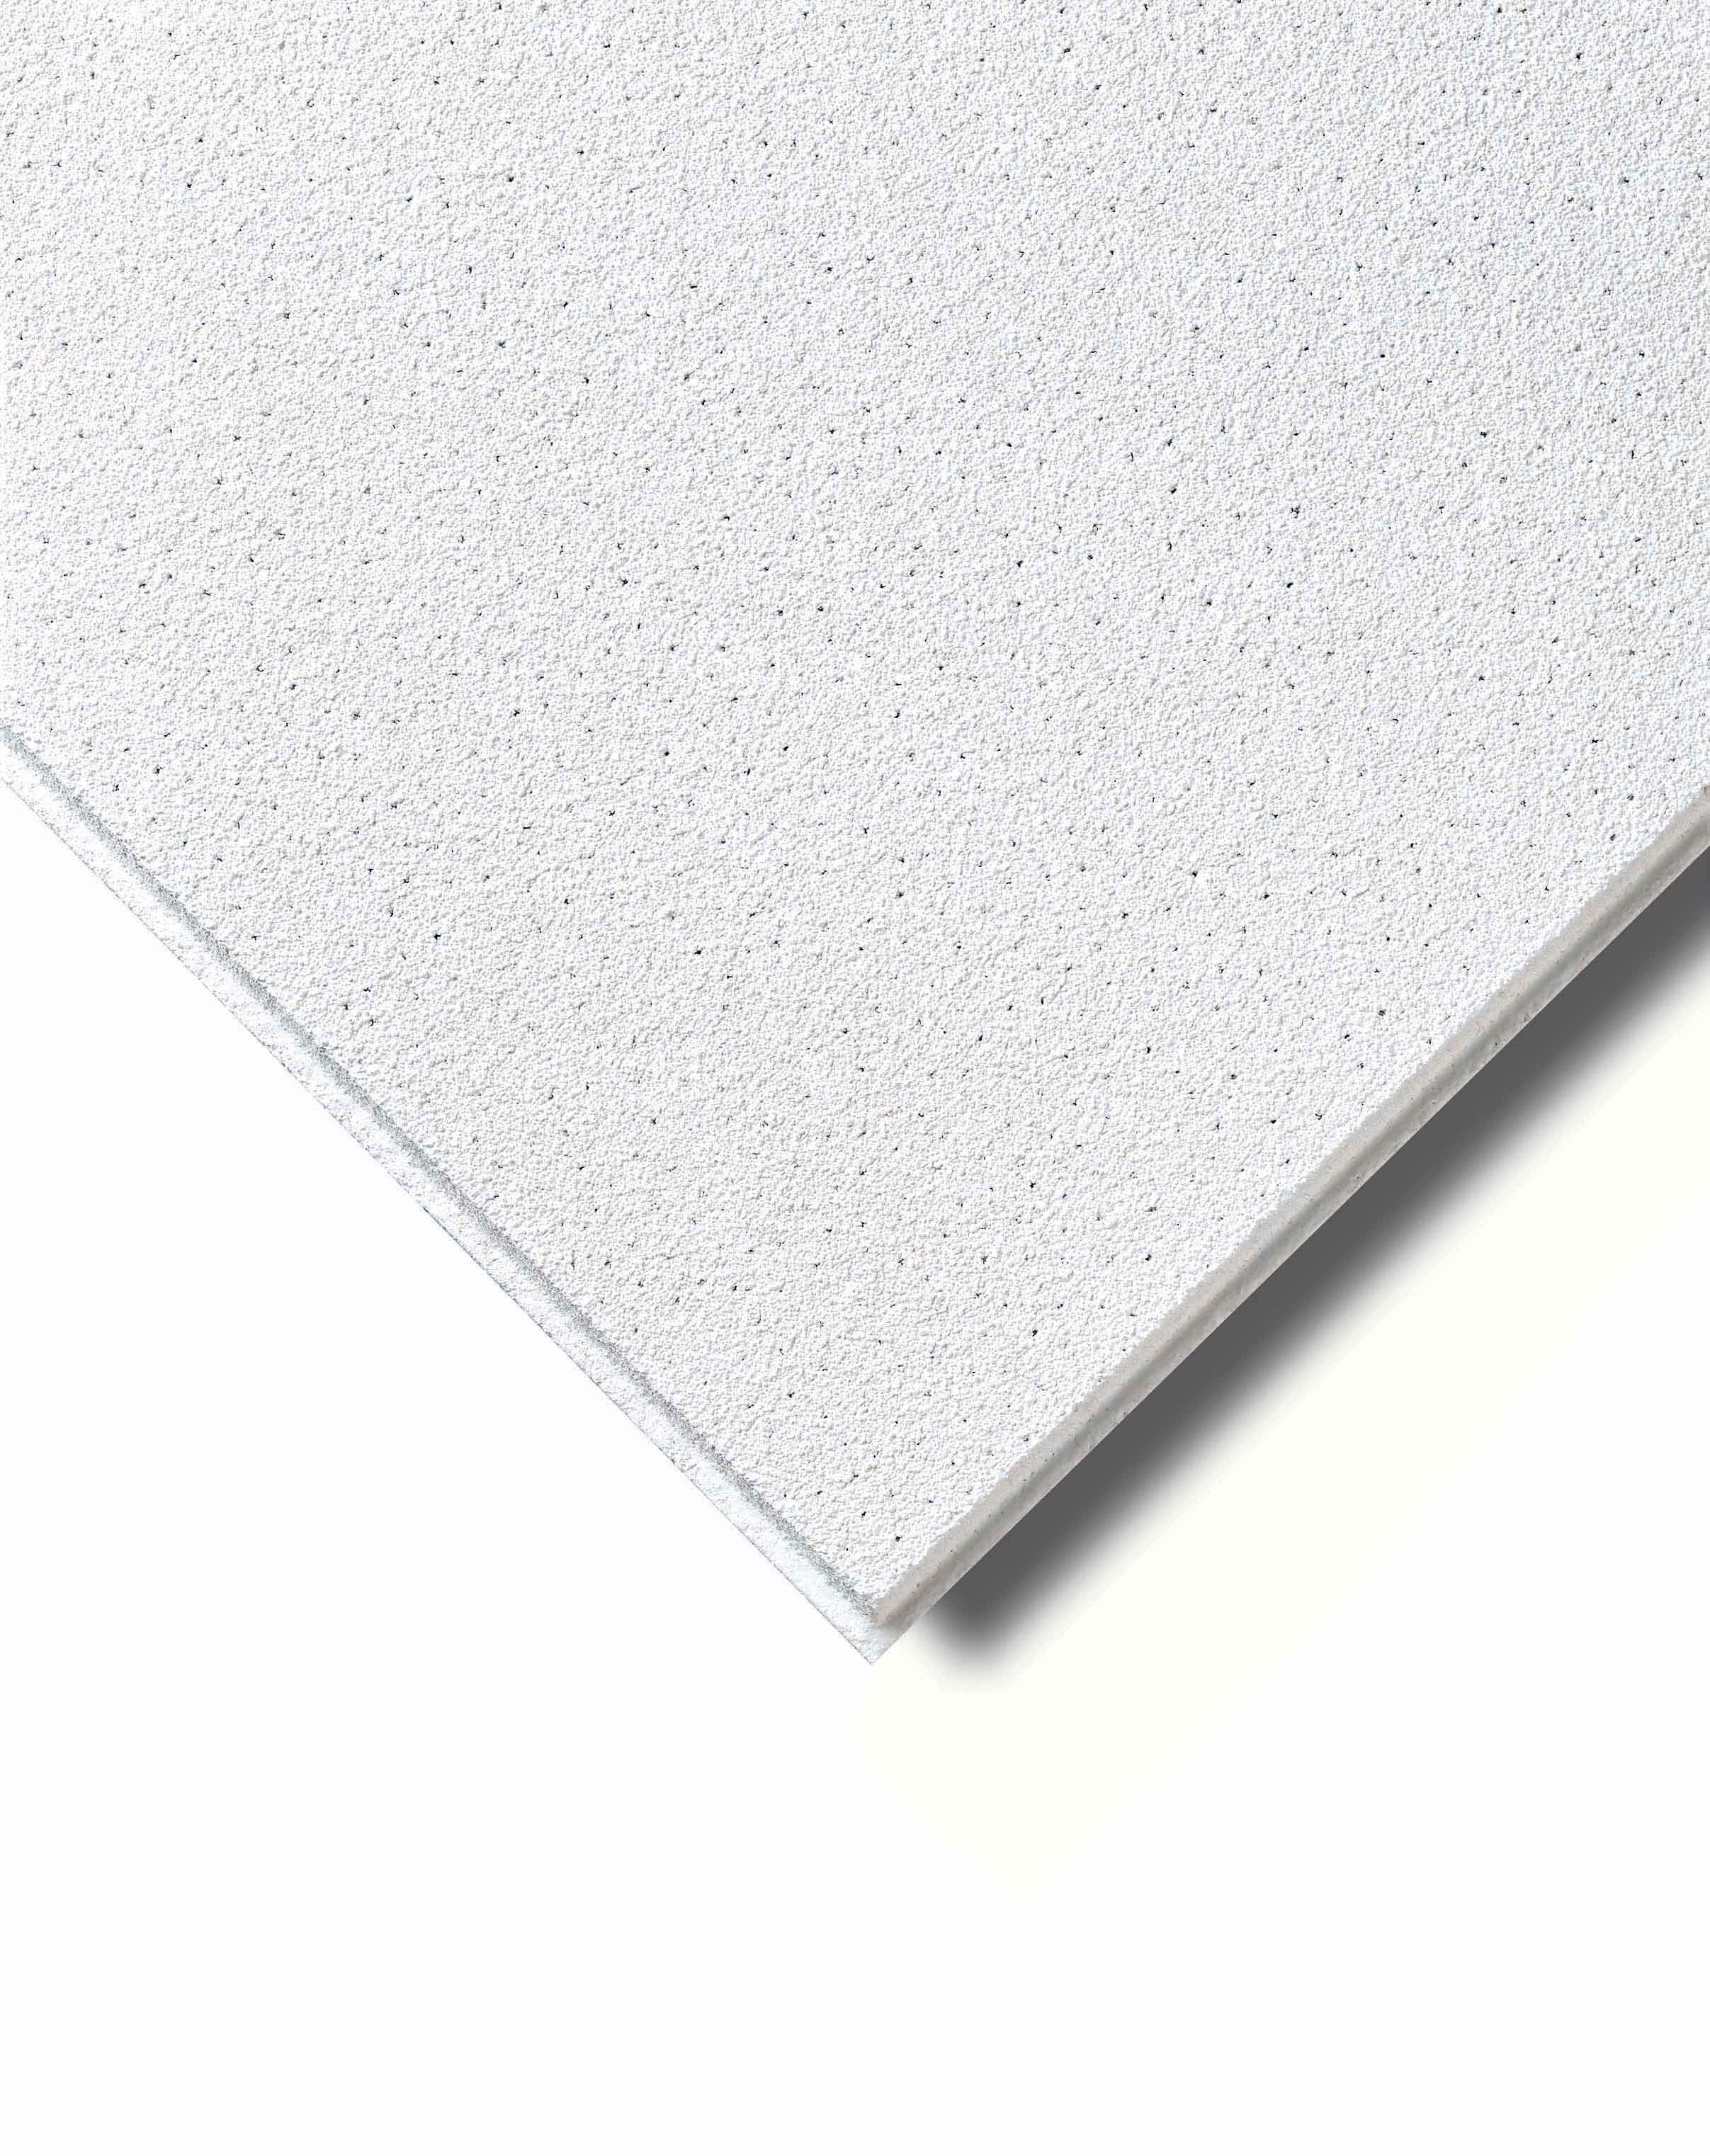 Armstrong Dune Db Ceiling Tiles Armstrong Dune Db Ceiling Tiles armstrong dune db 56ca nevill long interior systems 2414 X 3044